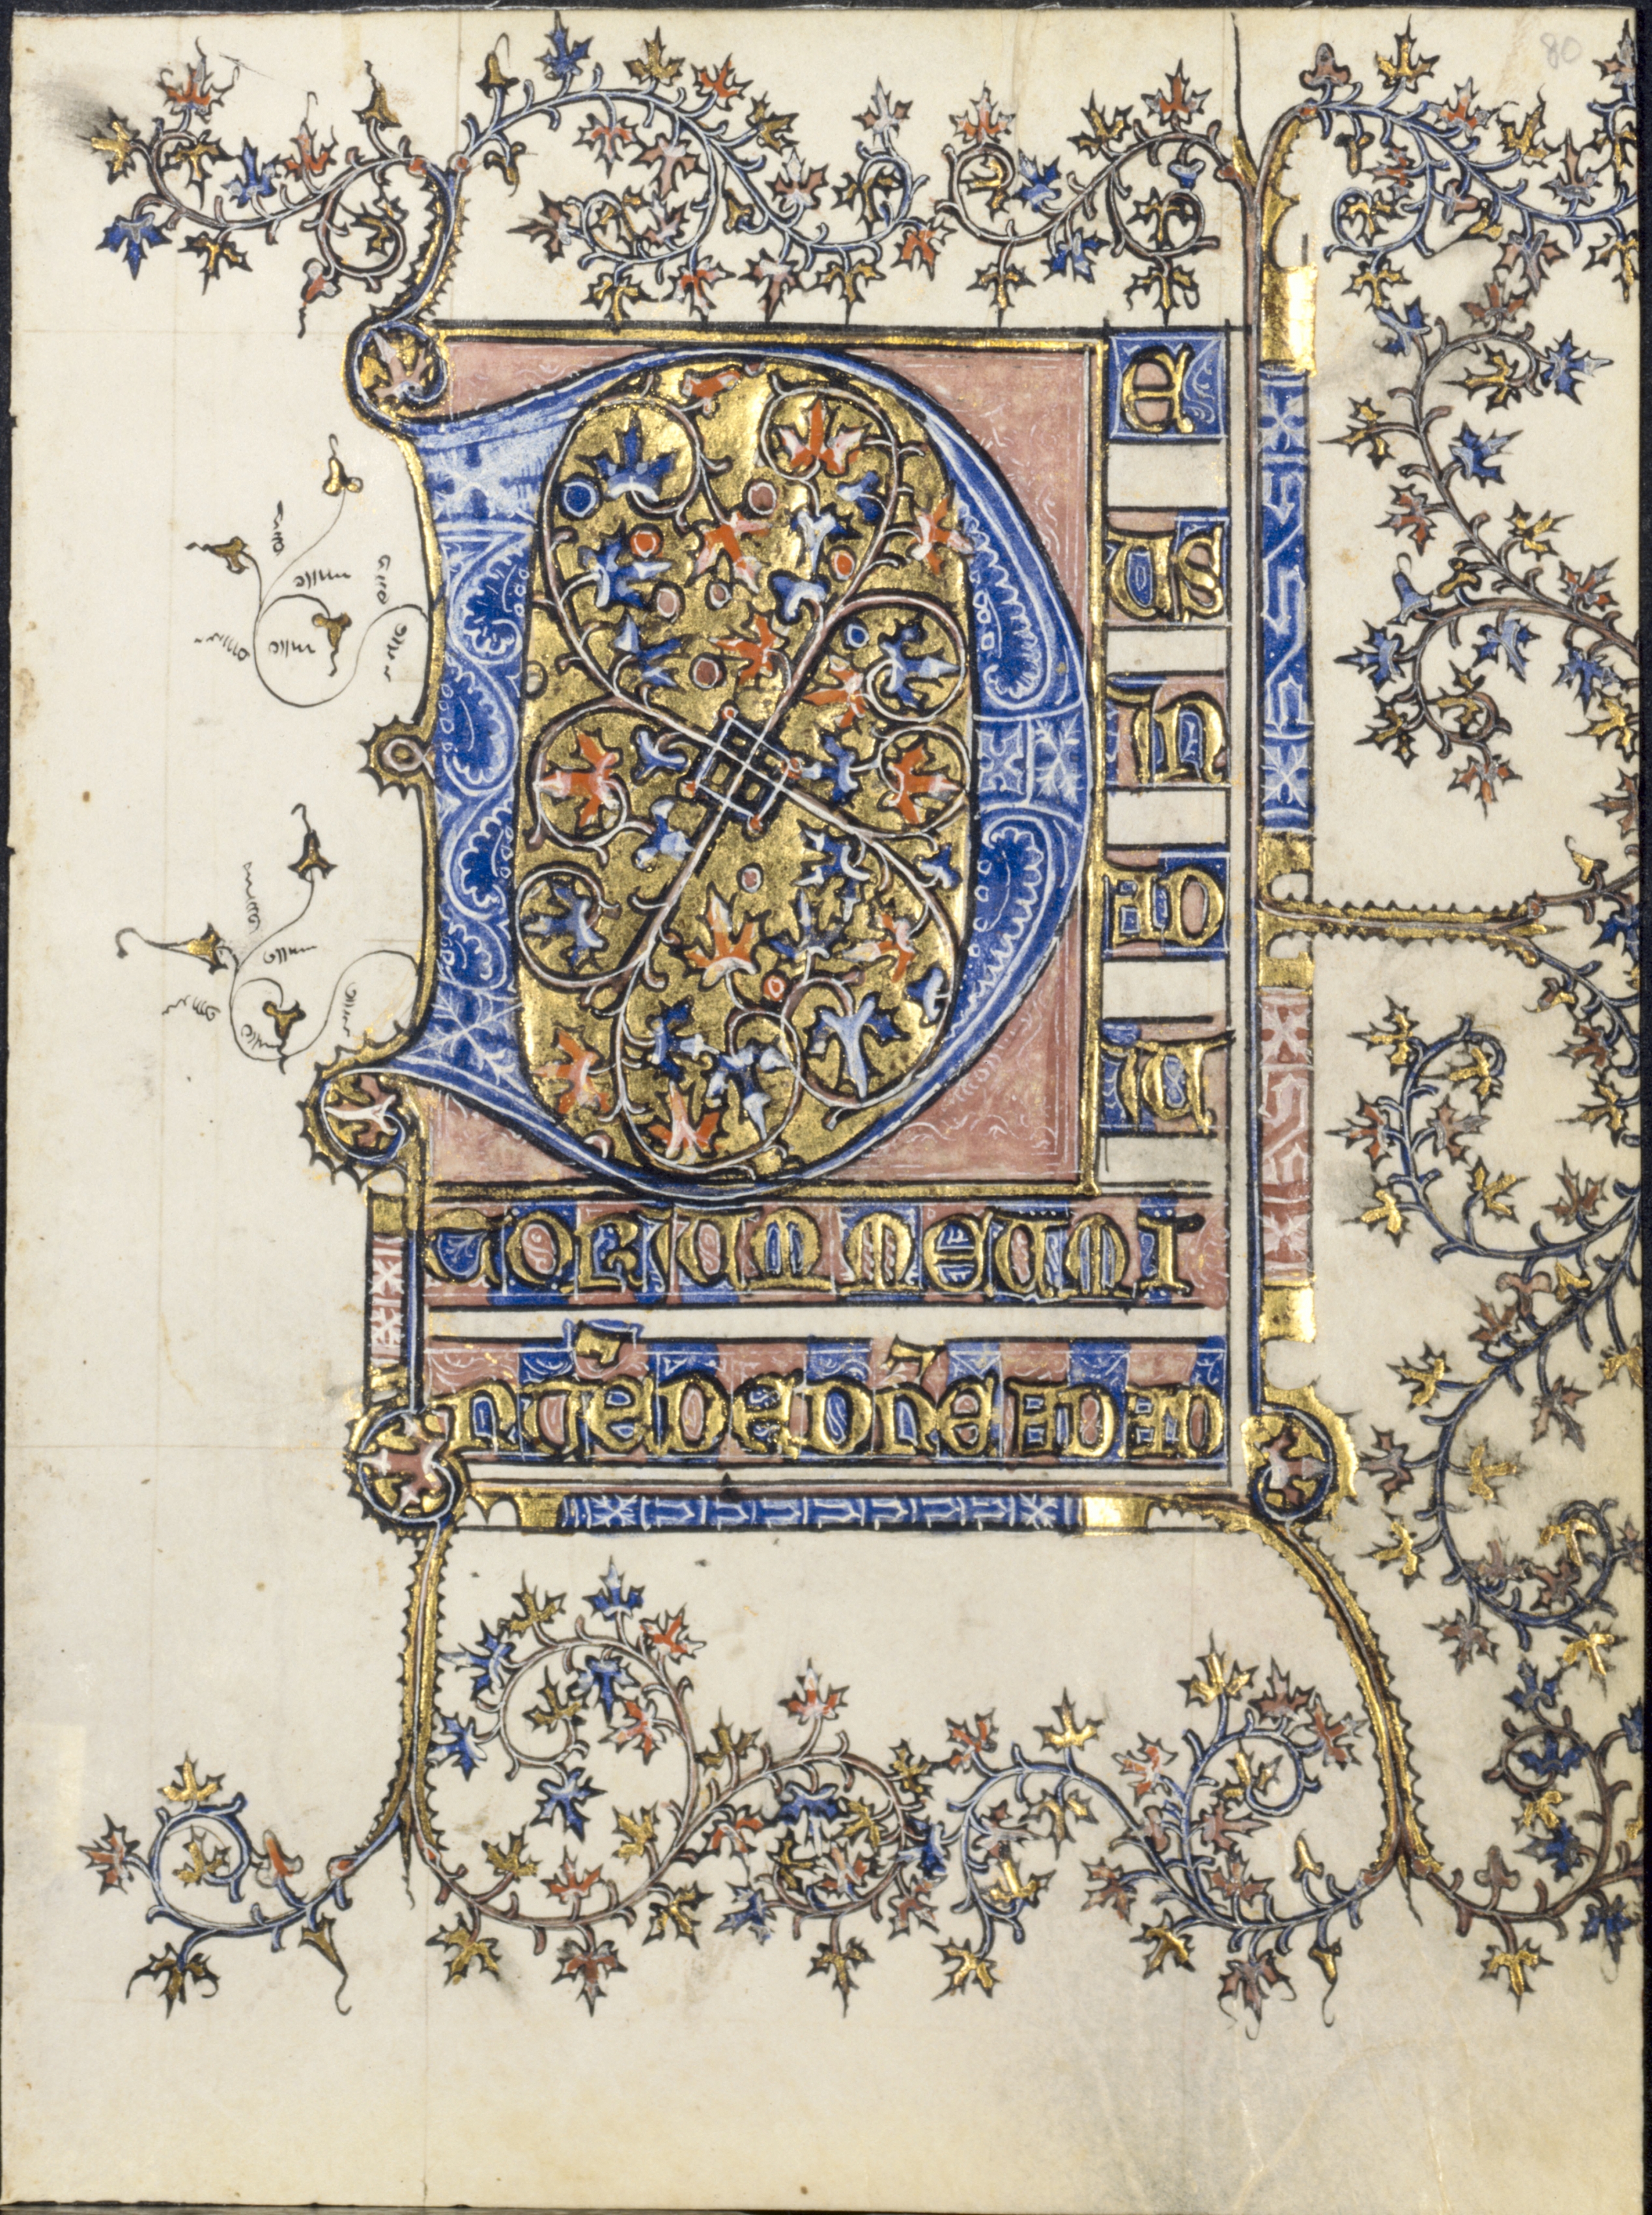 Leaf from a Book of Hours: Initial D